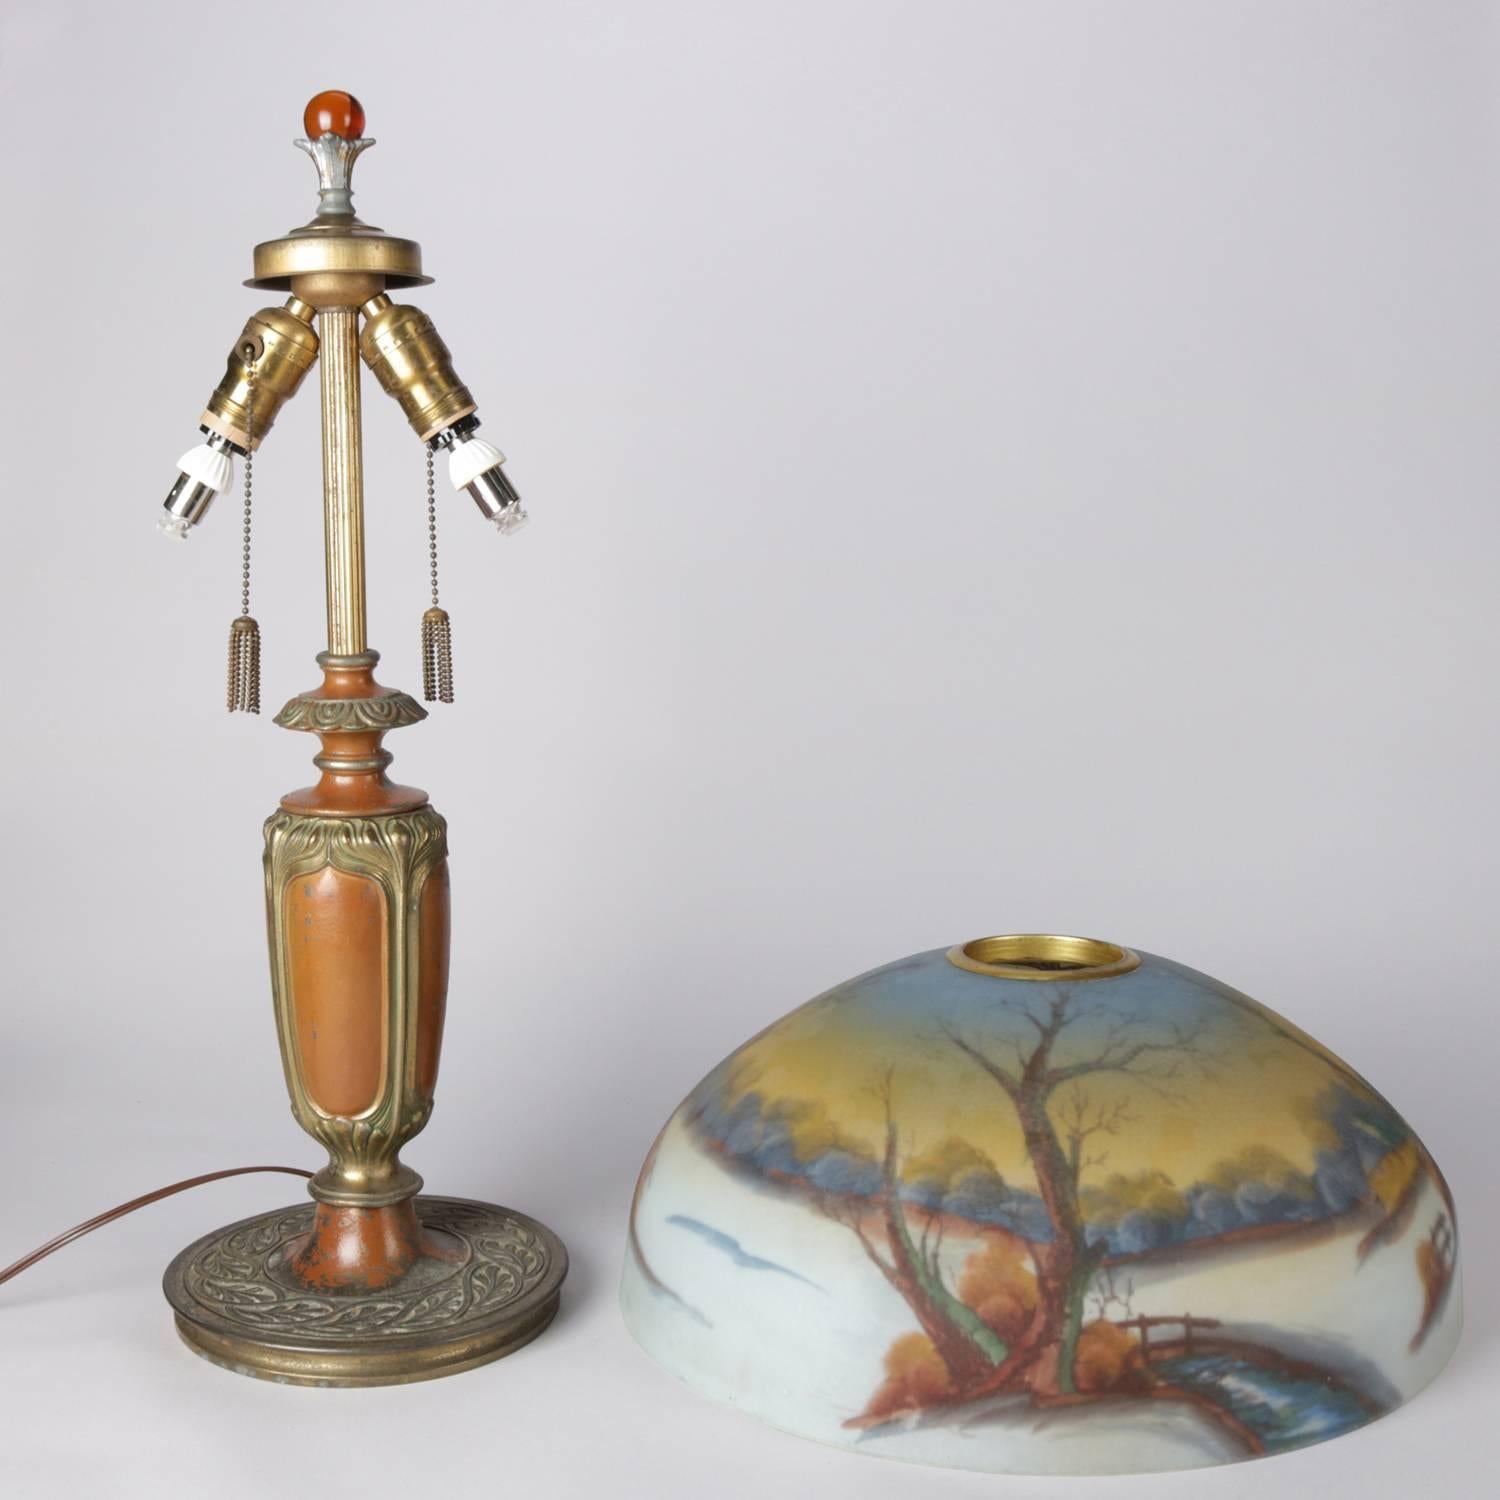 Arts & Crafts Pittsburgh School reverse painted table lamp features coppered and gilt foliate decorated cast base with dual lights and reverse painted shade depicting winter landscape stream scene with footbridge, finial with amber glass bead, newly